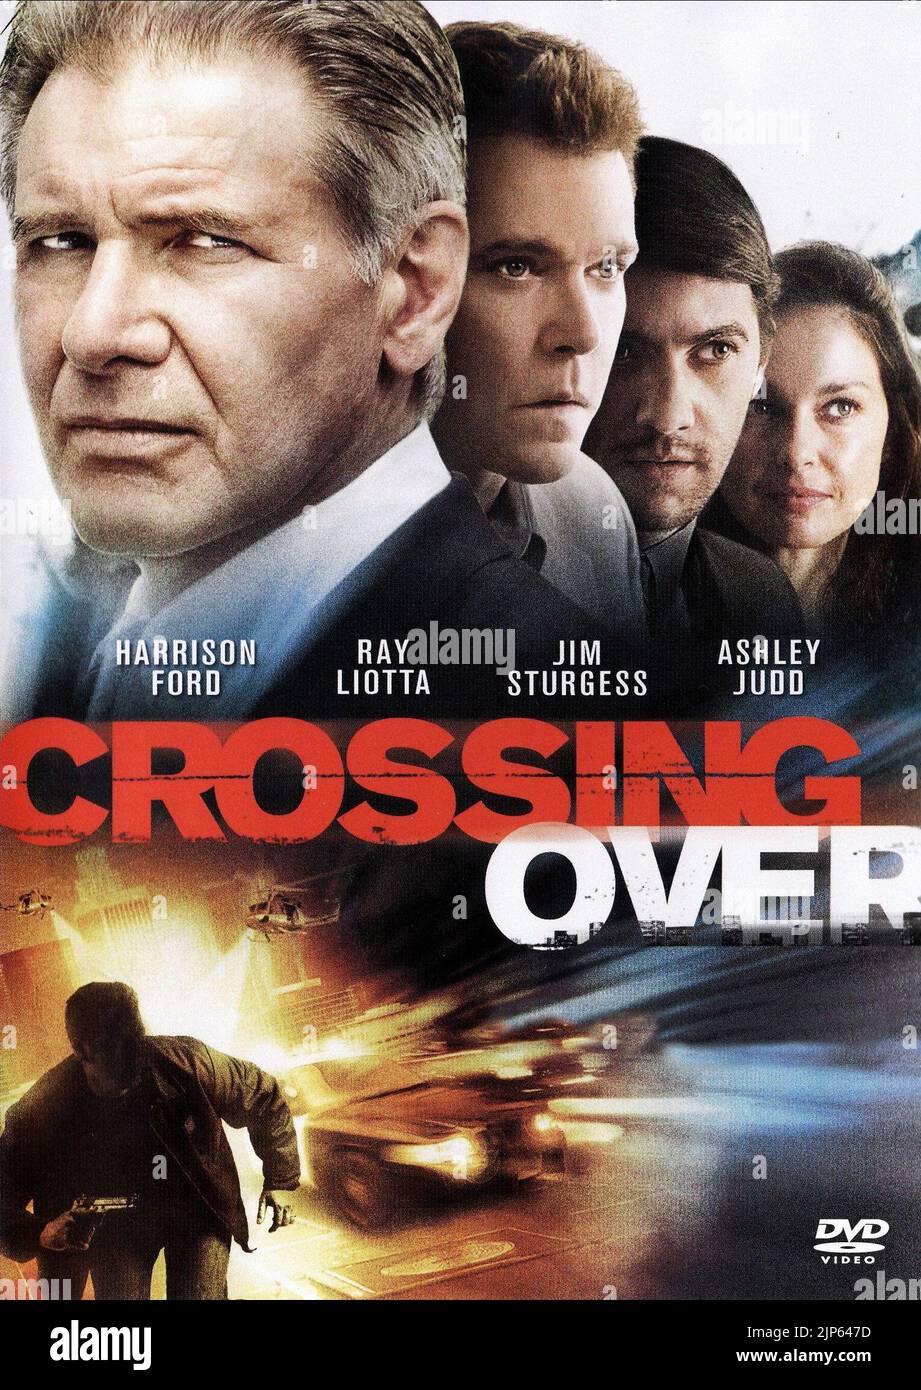 HARRISON FORD, RAY LIOTTA, JIM STURGESS, ASHLEY JUDD POSTER, CROSSING OVER, 2009 Stock Photo